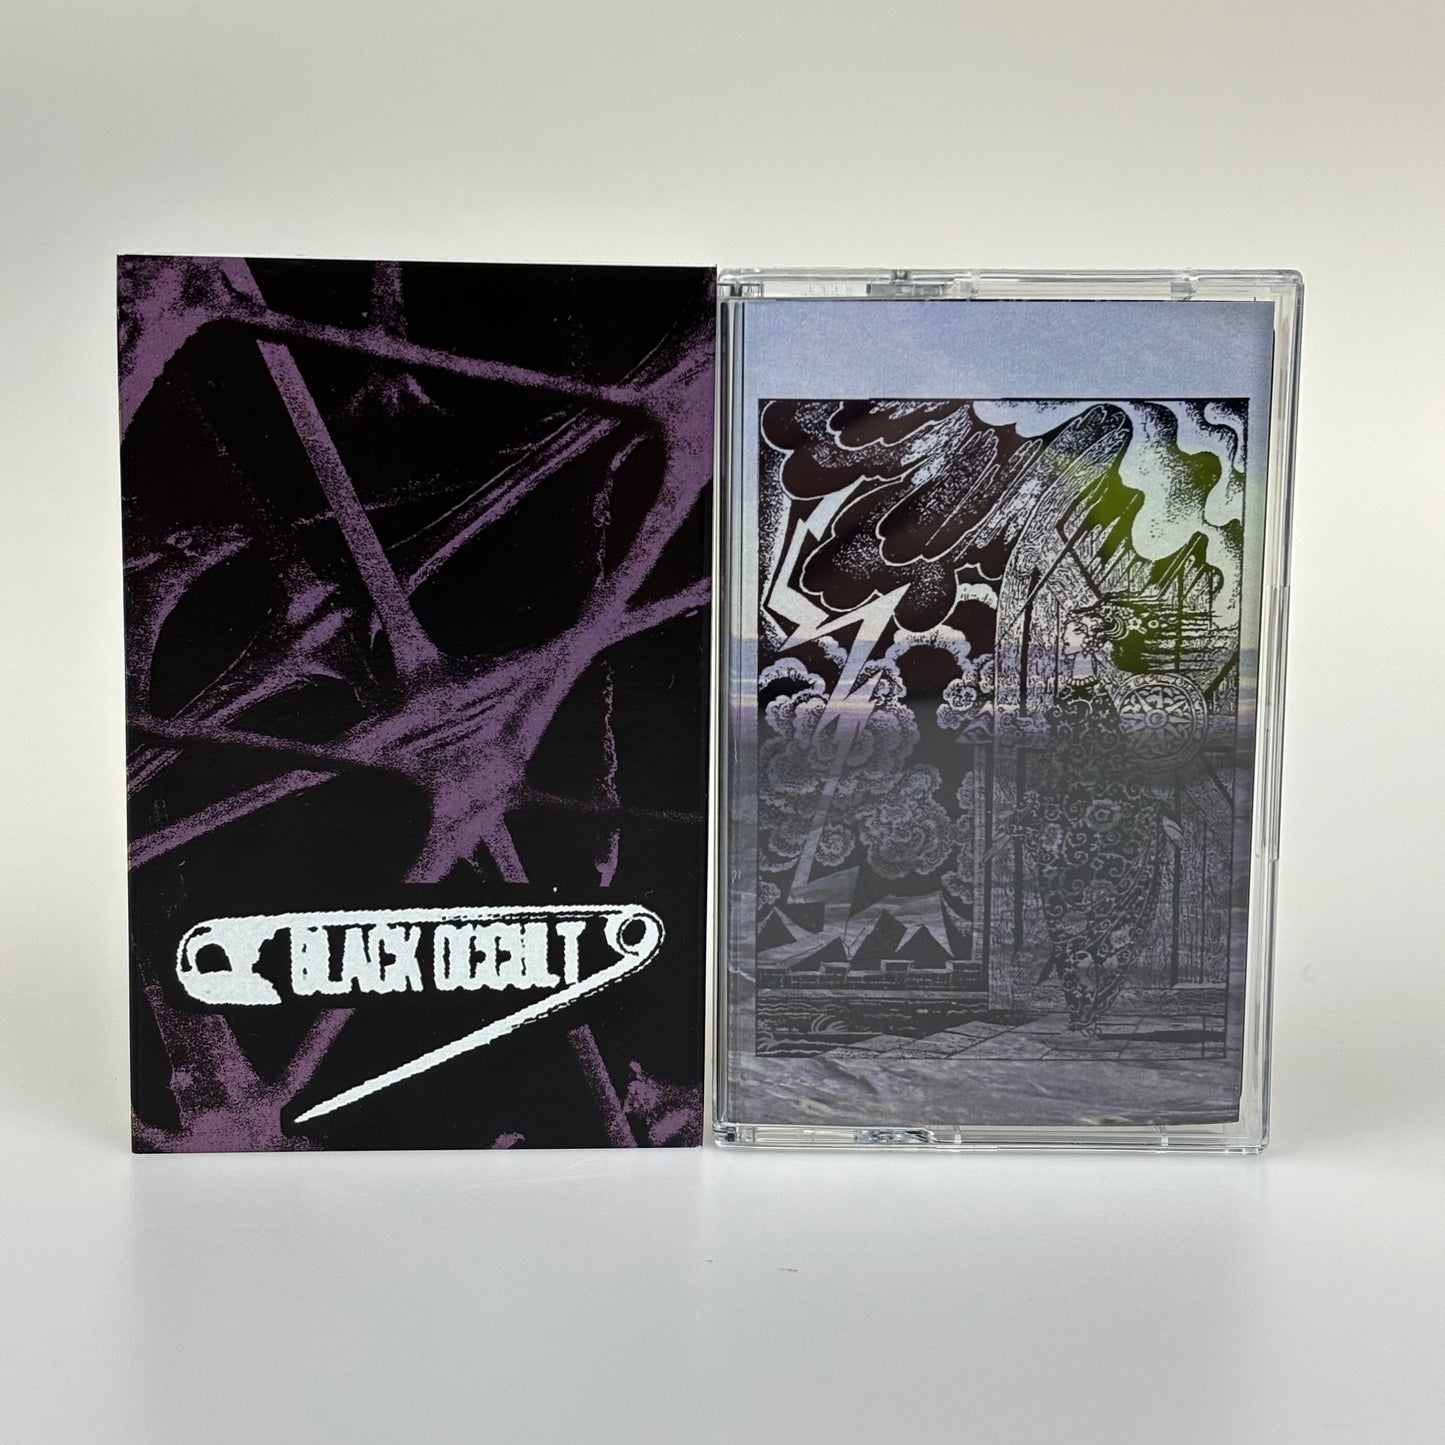 AESTHETIC CLOTH & PERFUME - Collective Hysterics and Popular Beliefs cassette